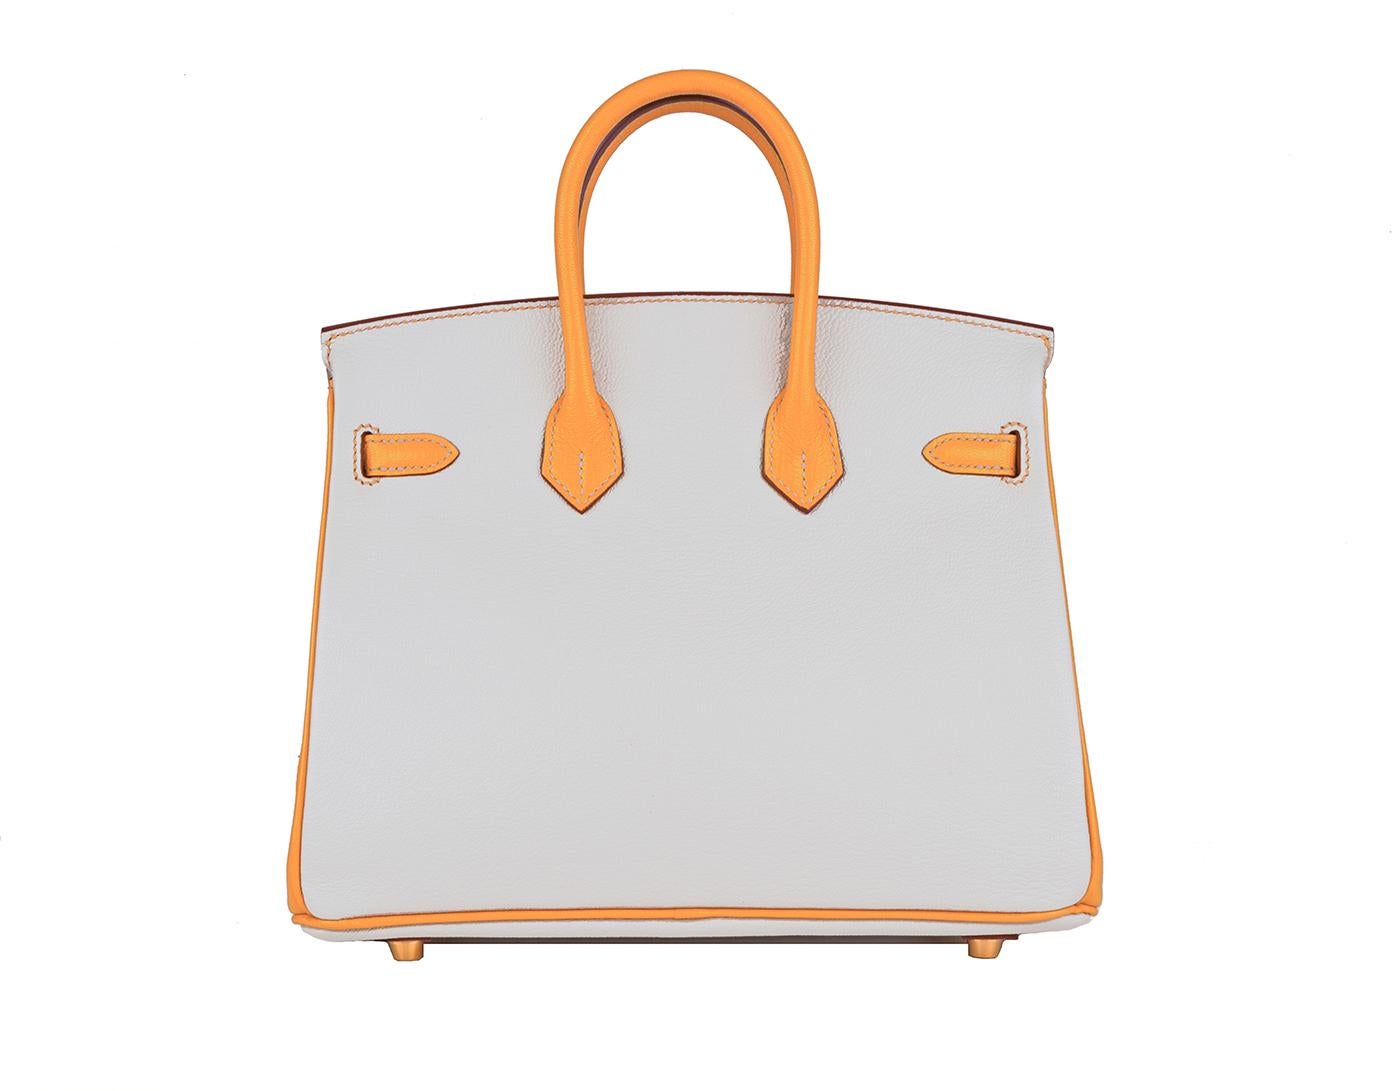 Hermes 25cm Special Order Birkin
HSS Gris perle and Moutarde
Gris Perle one of the most sought after colors Hermes has produced in a light grey
Chevre Leather, the most durable leather
This is such a great combination, as it takes you from day to